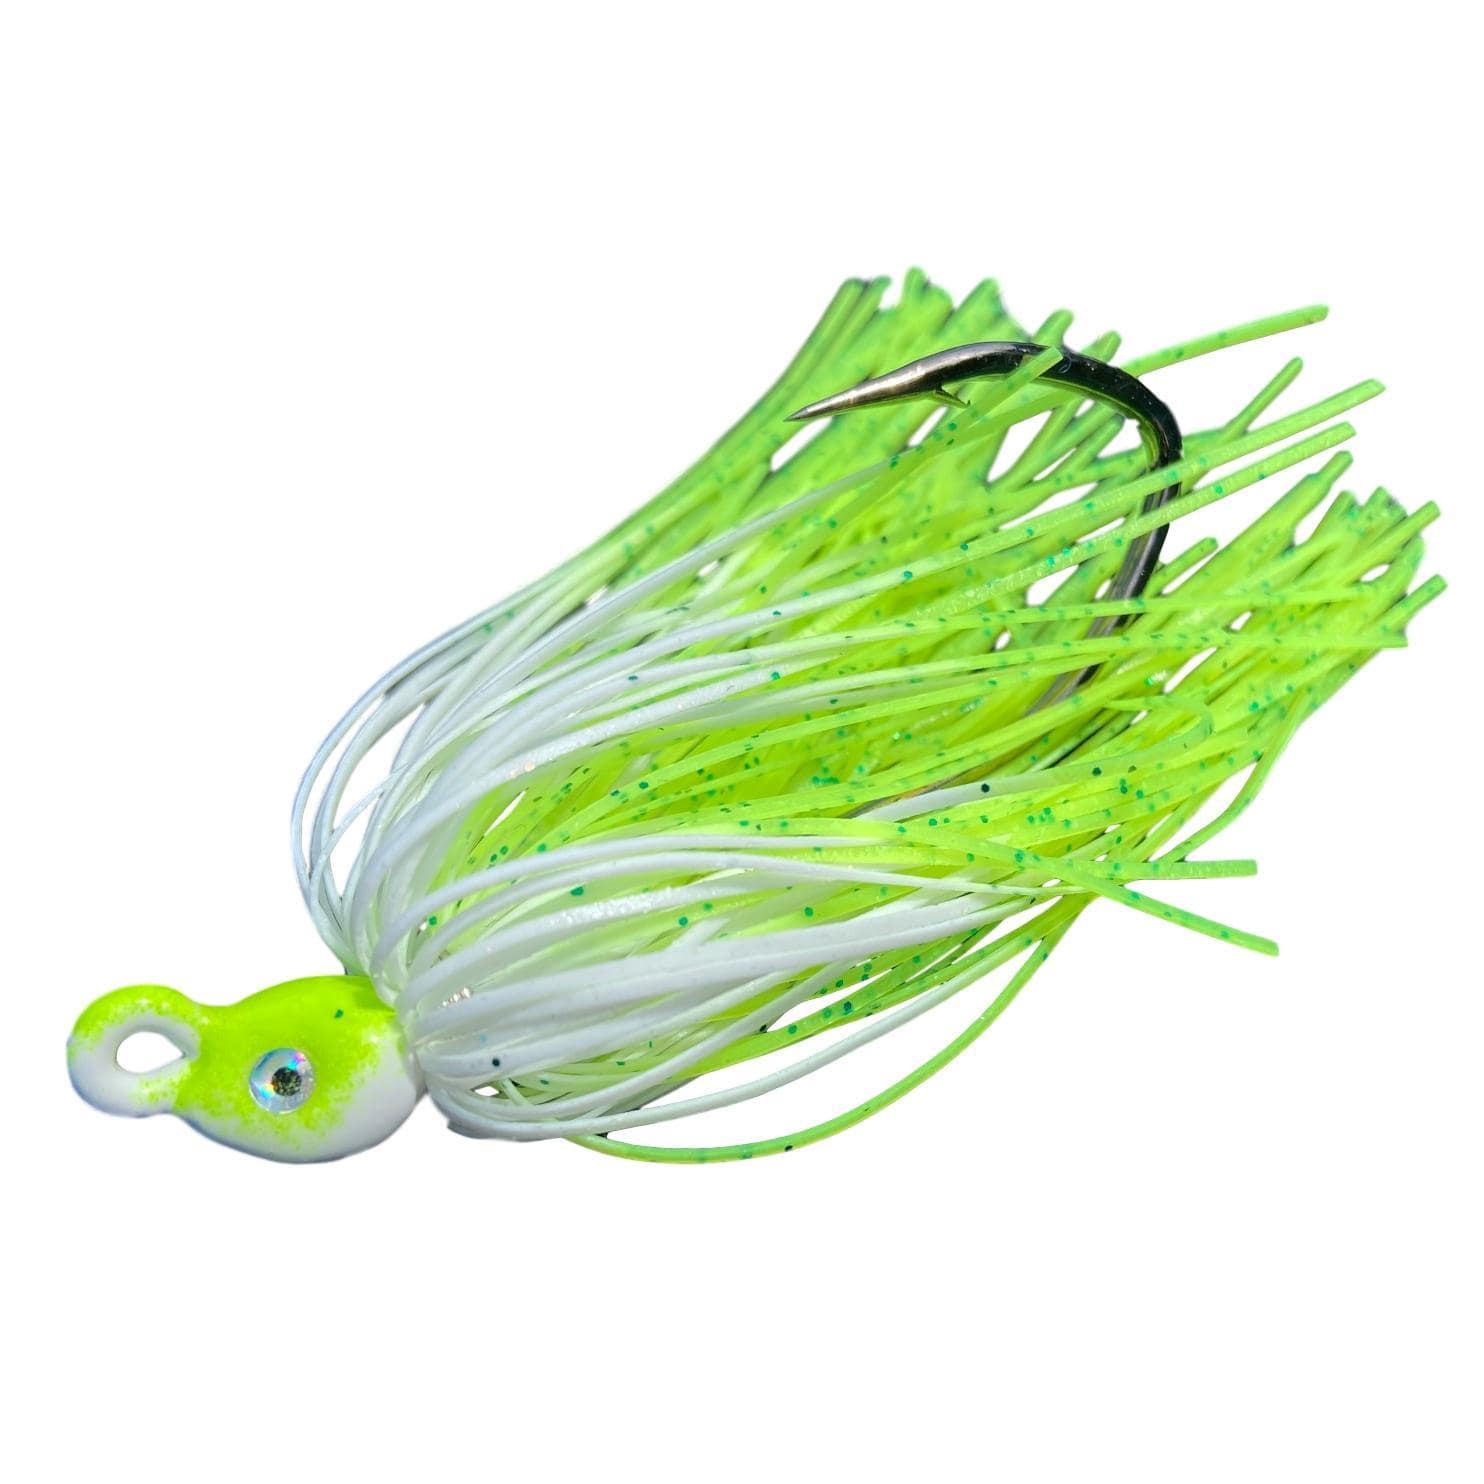 Fishing Lures Tagged Brand_Backwater Custom Baits - The